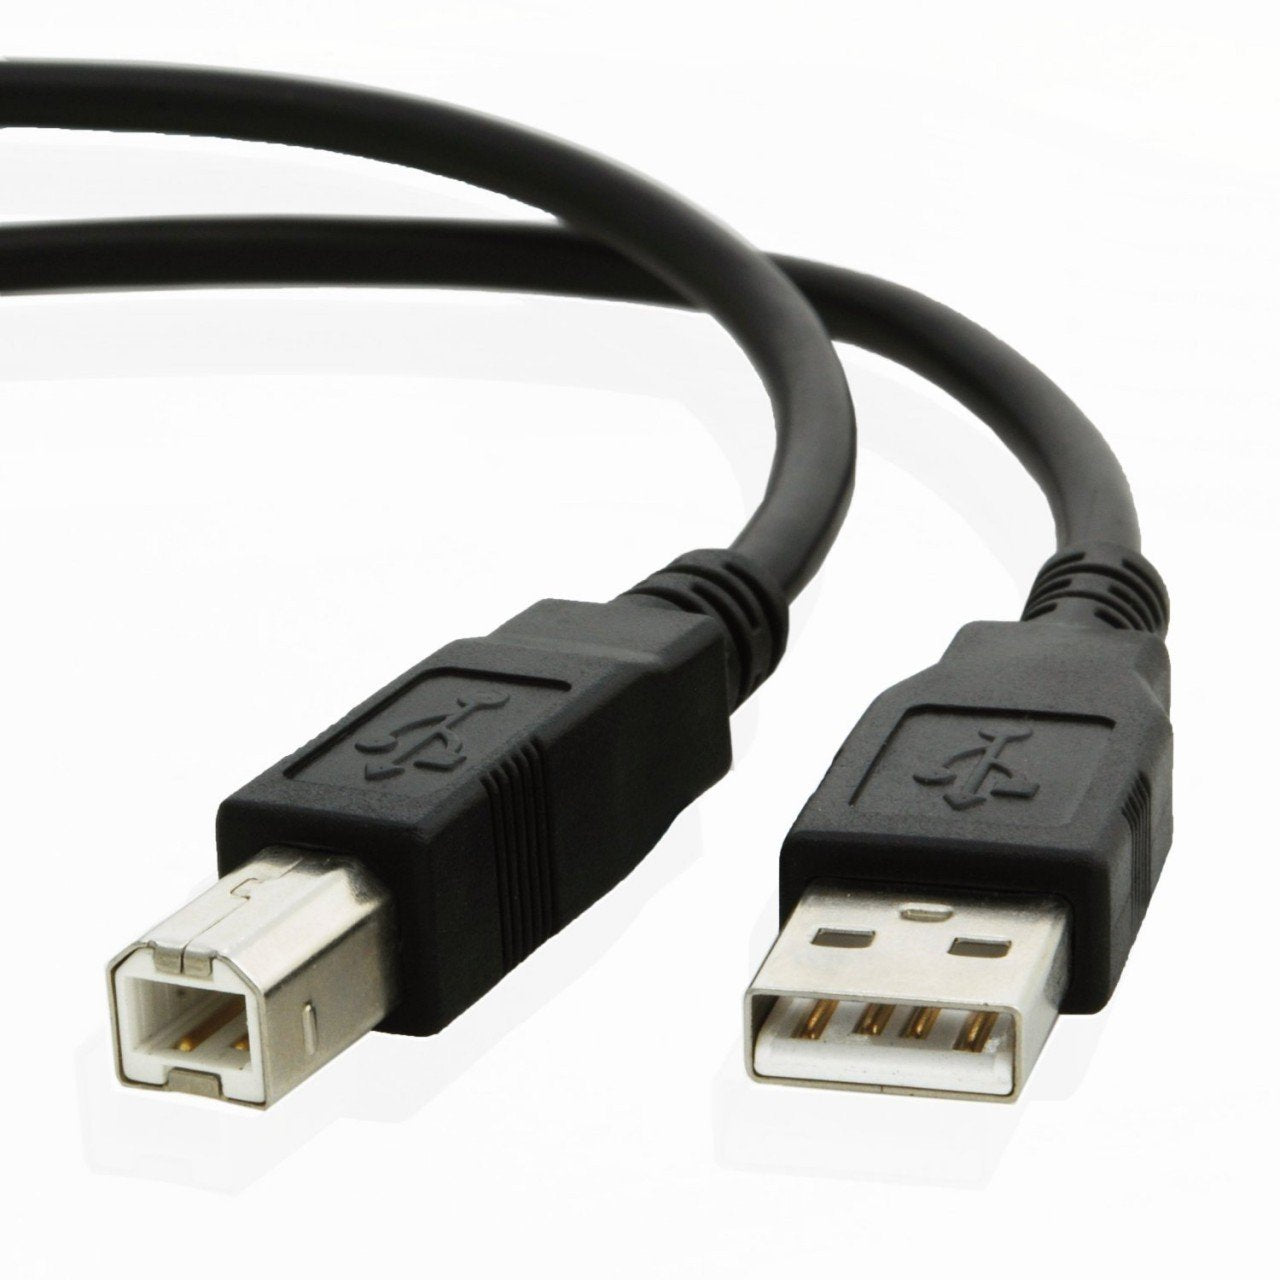 USB cable for Epson EXPRESSION XP-340